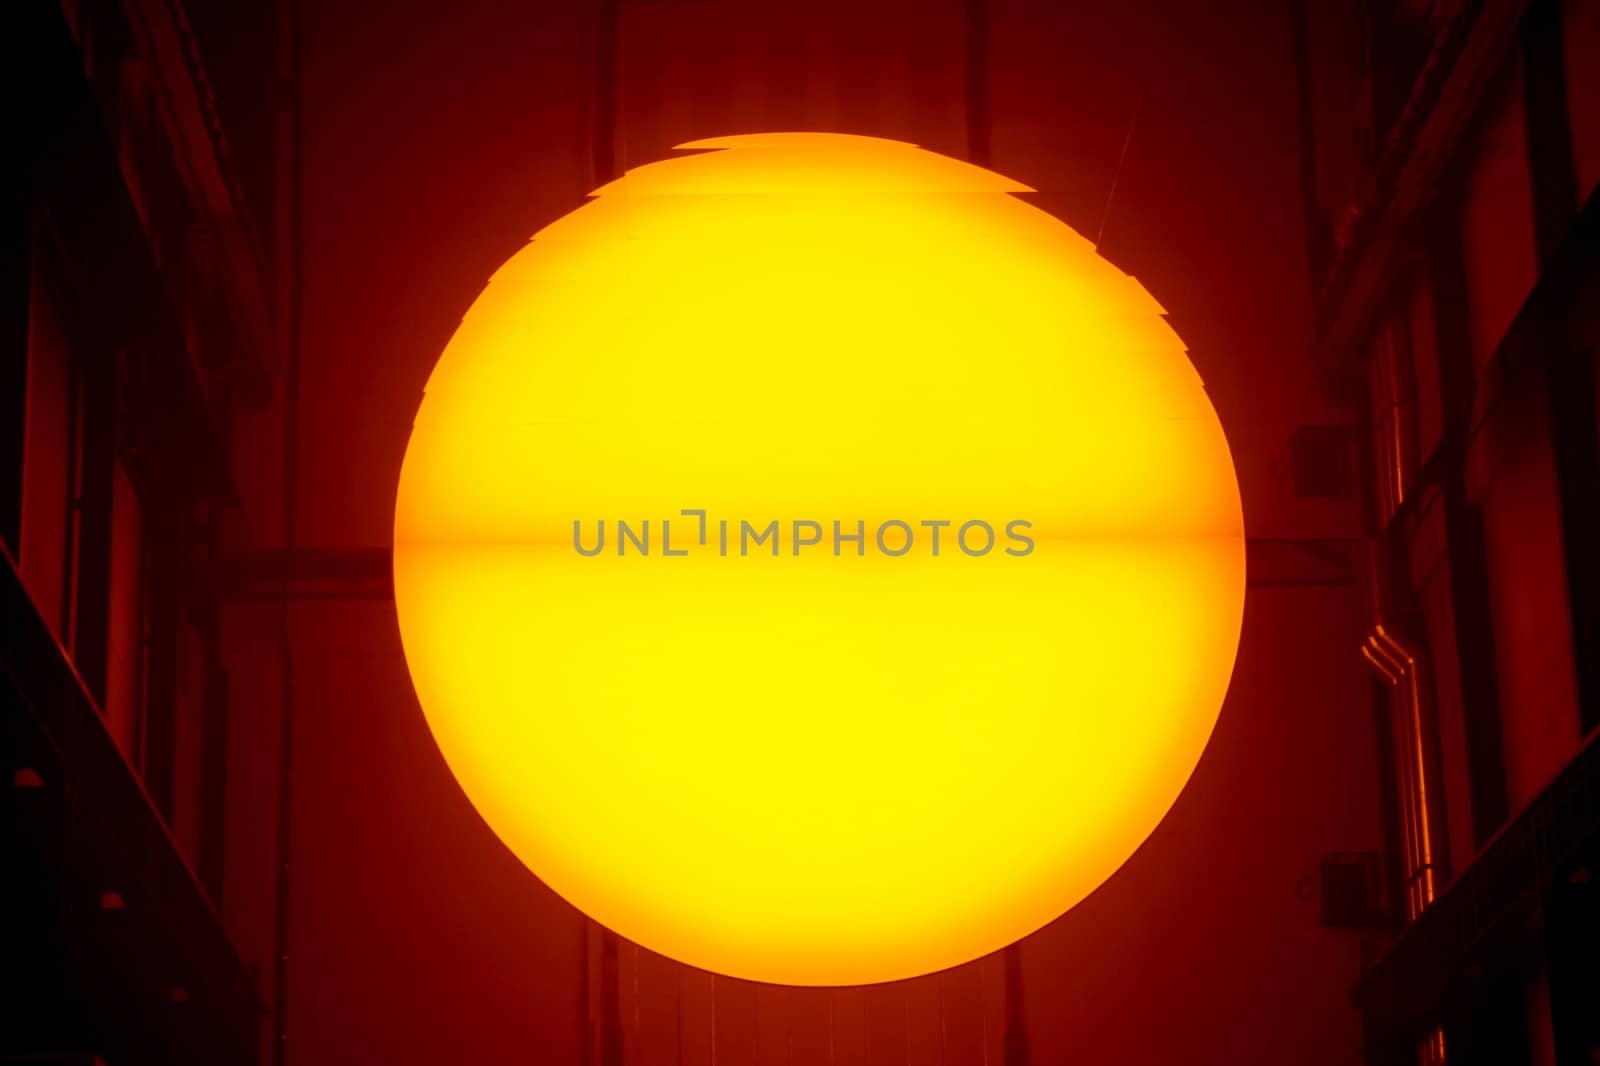 London - January 21, 2004: Eliasson's The Weather Project, which created a fake sun inside the Tate Modern, drew more than two million visitors to the London gallery.